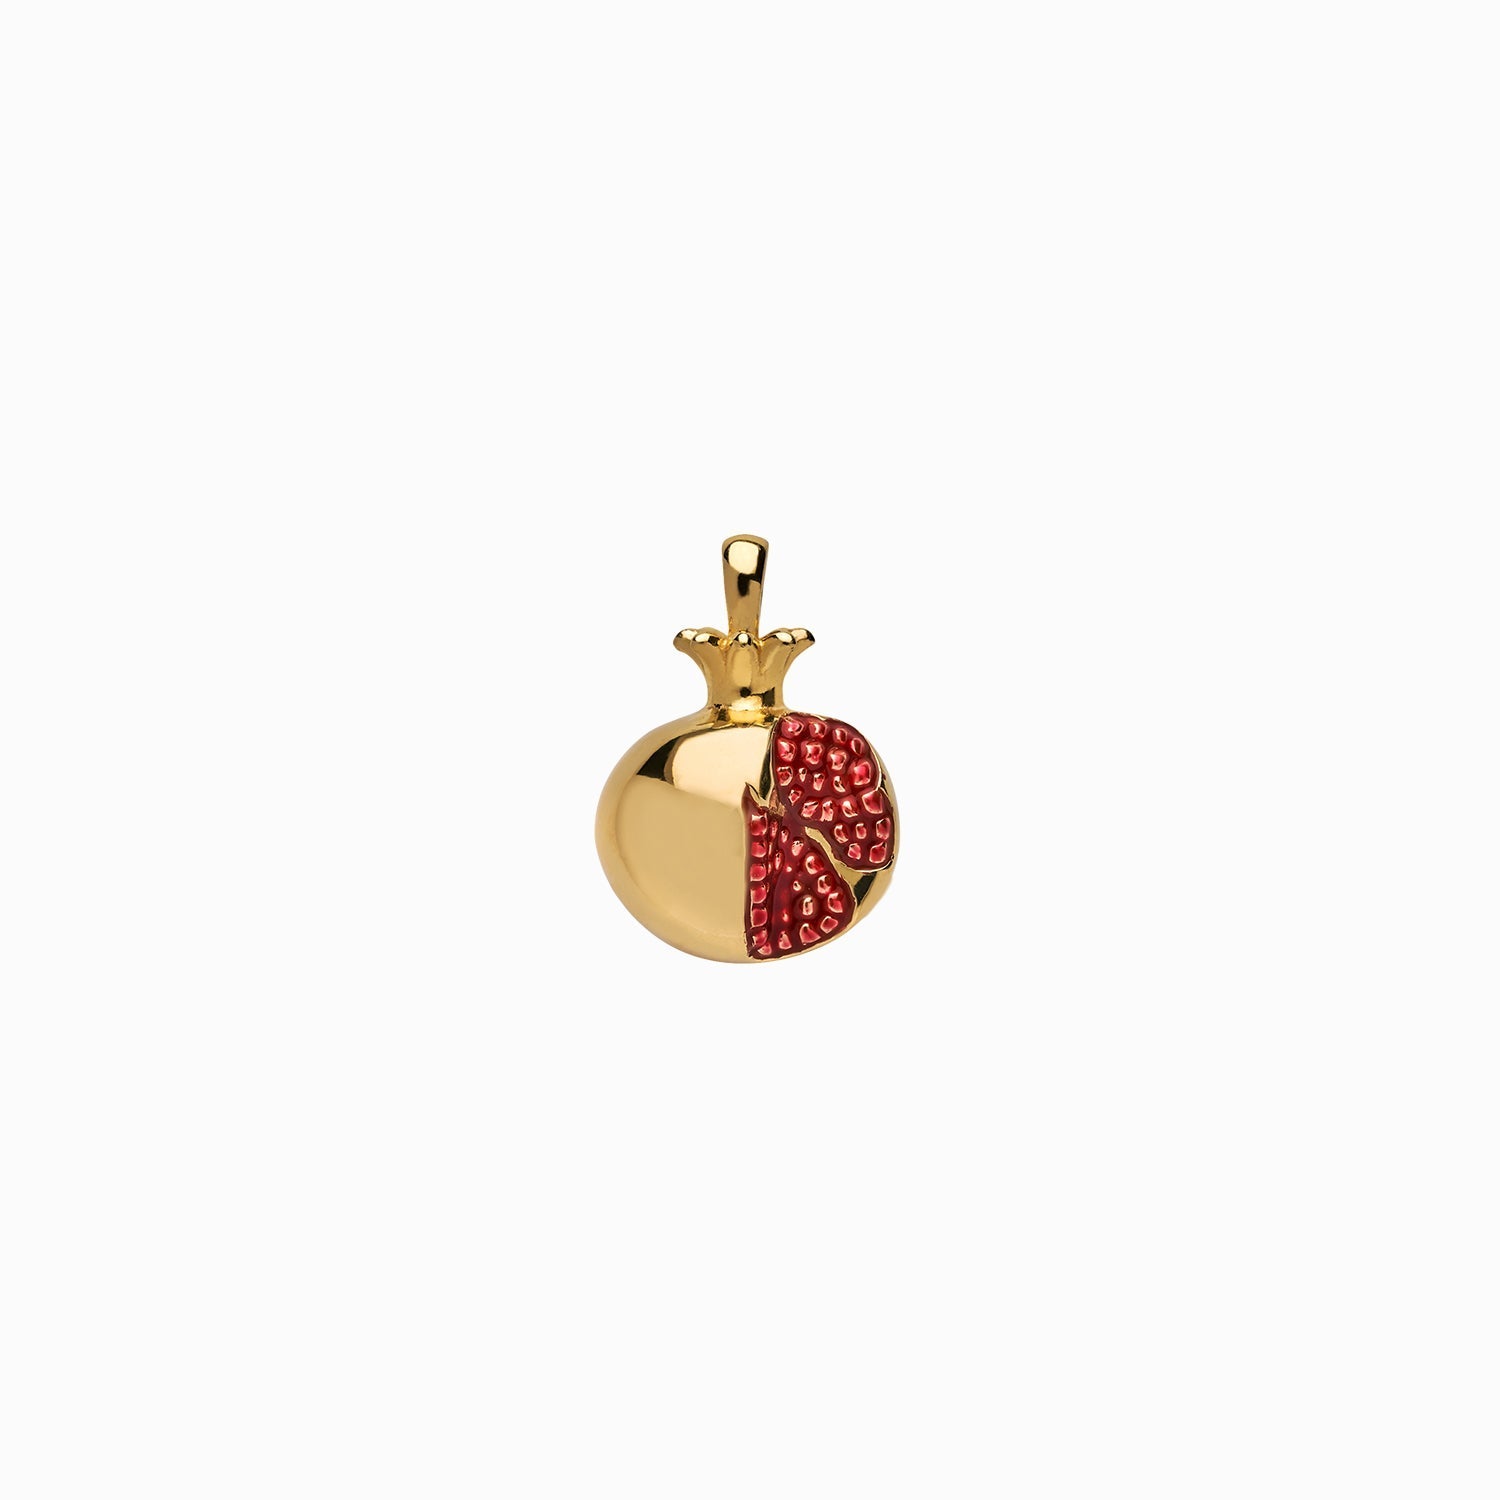 Product image of A gold plated Pomegranate Amulet pendant with red stones by Awe Inspired.